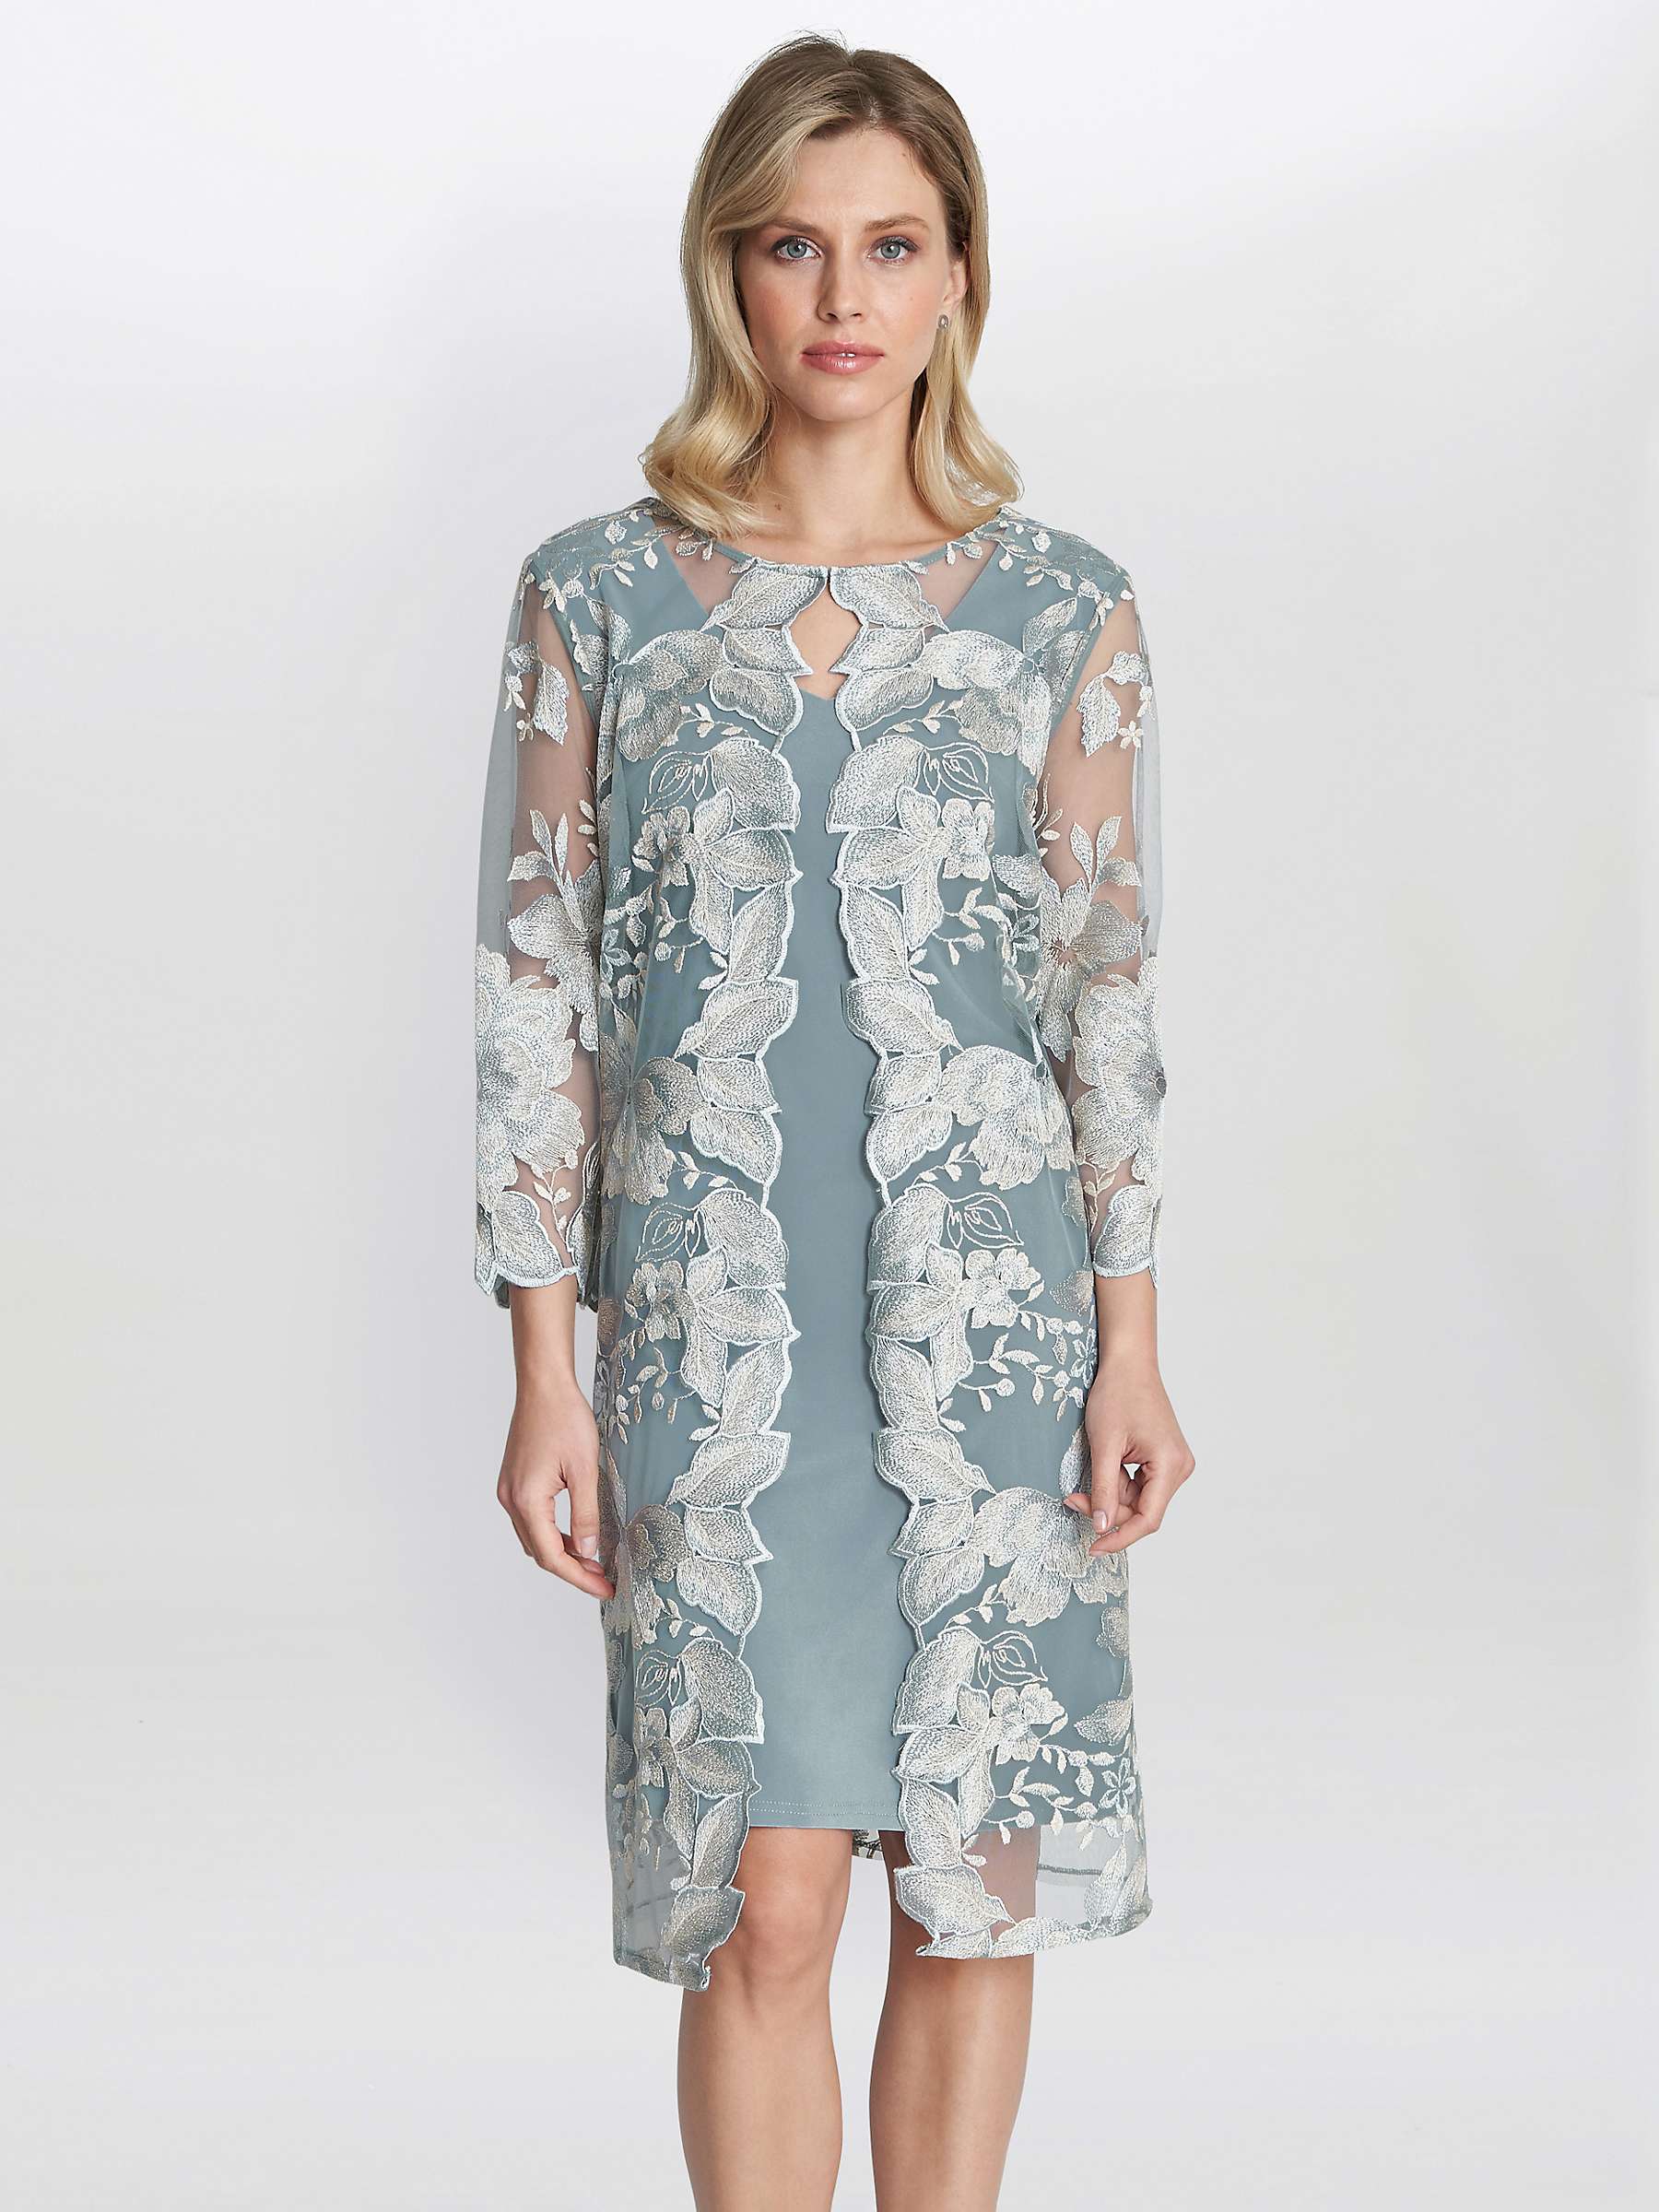 Buy Gina Bacconi Savoy Embroidered Lace Jacket and Dress, Ice Sage Online at johnlewis.com